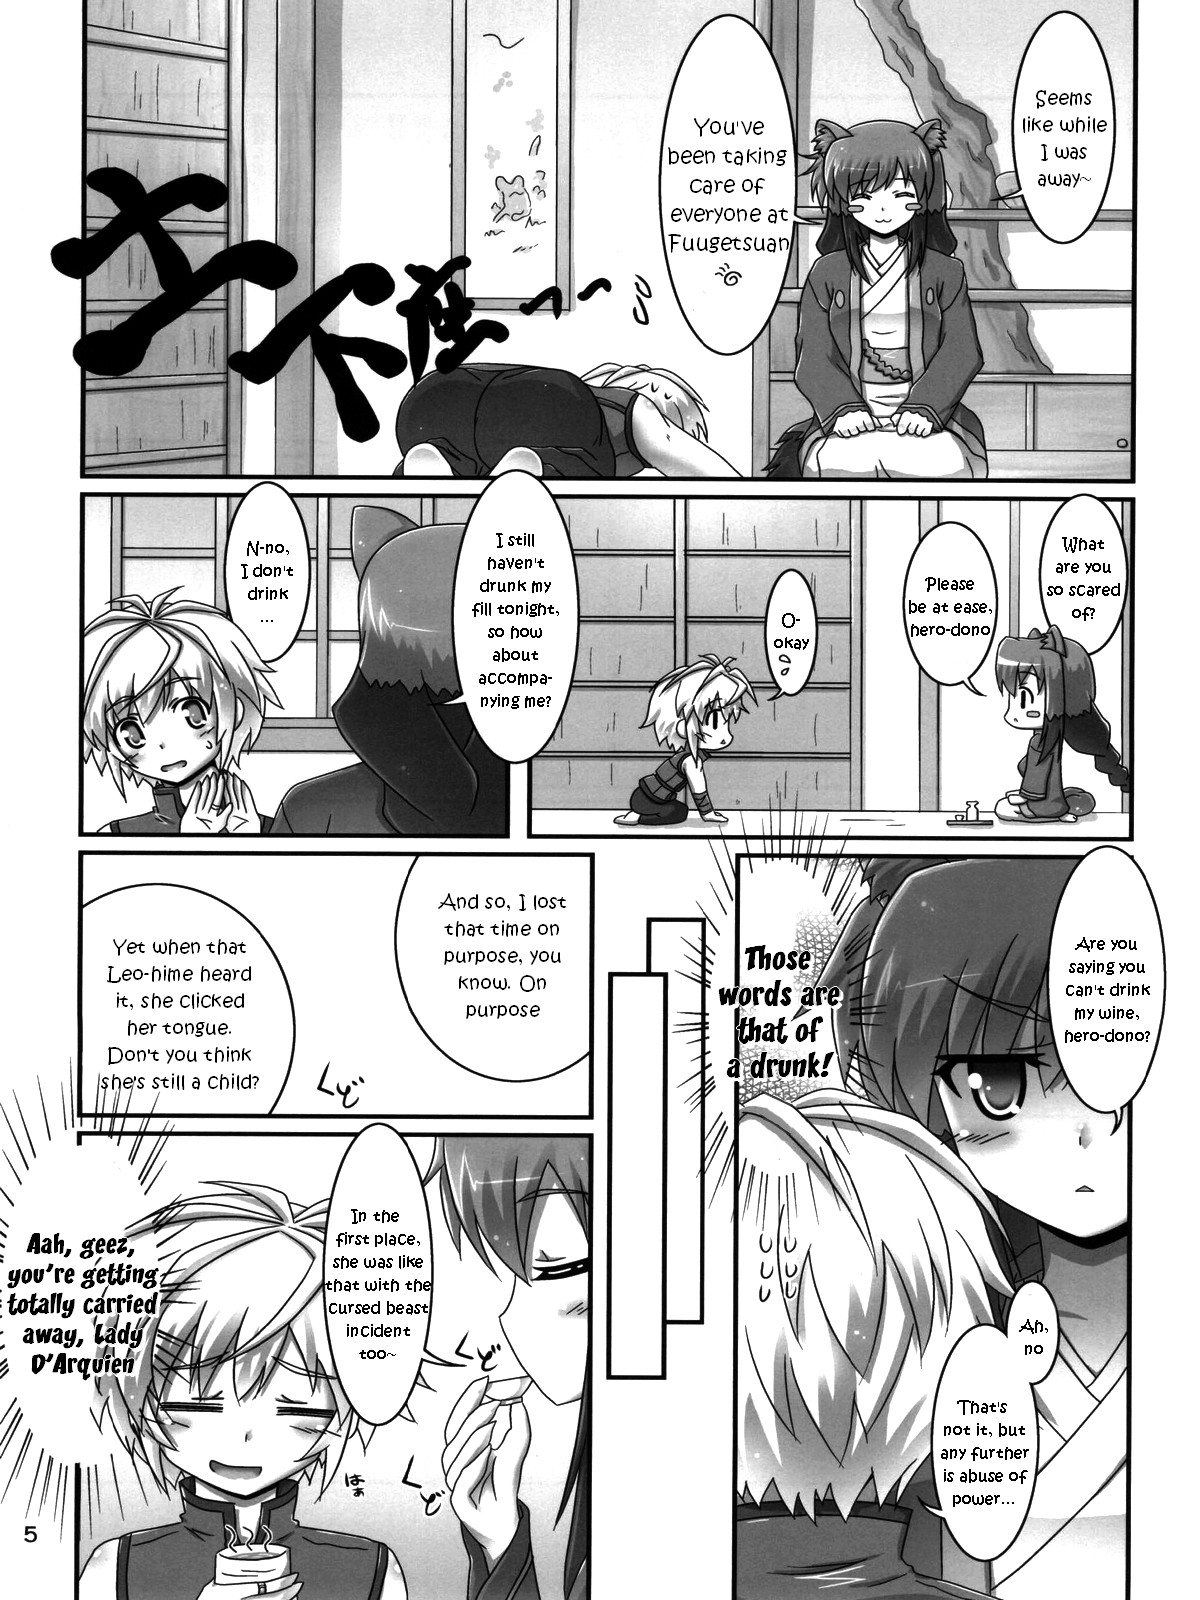 (CT24) [Serenta (BOM)] Oyakata-sama to Issho | Together with the Owner (DOG DAYS) [English] [EHCOVE] page 4 full